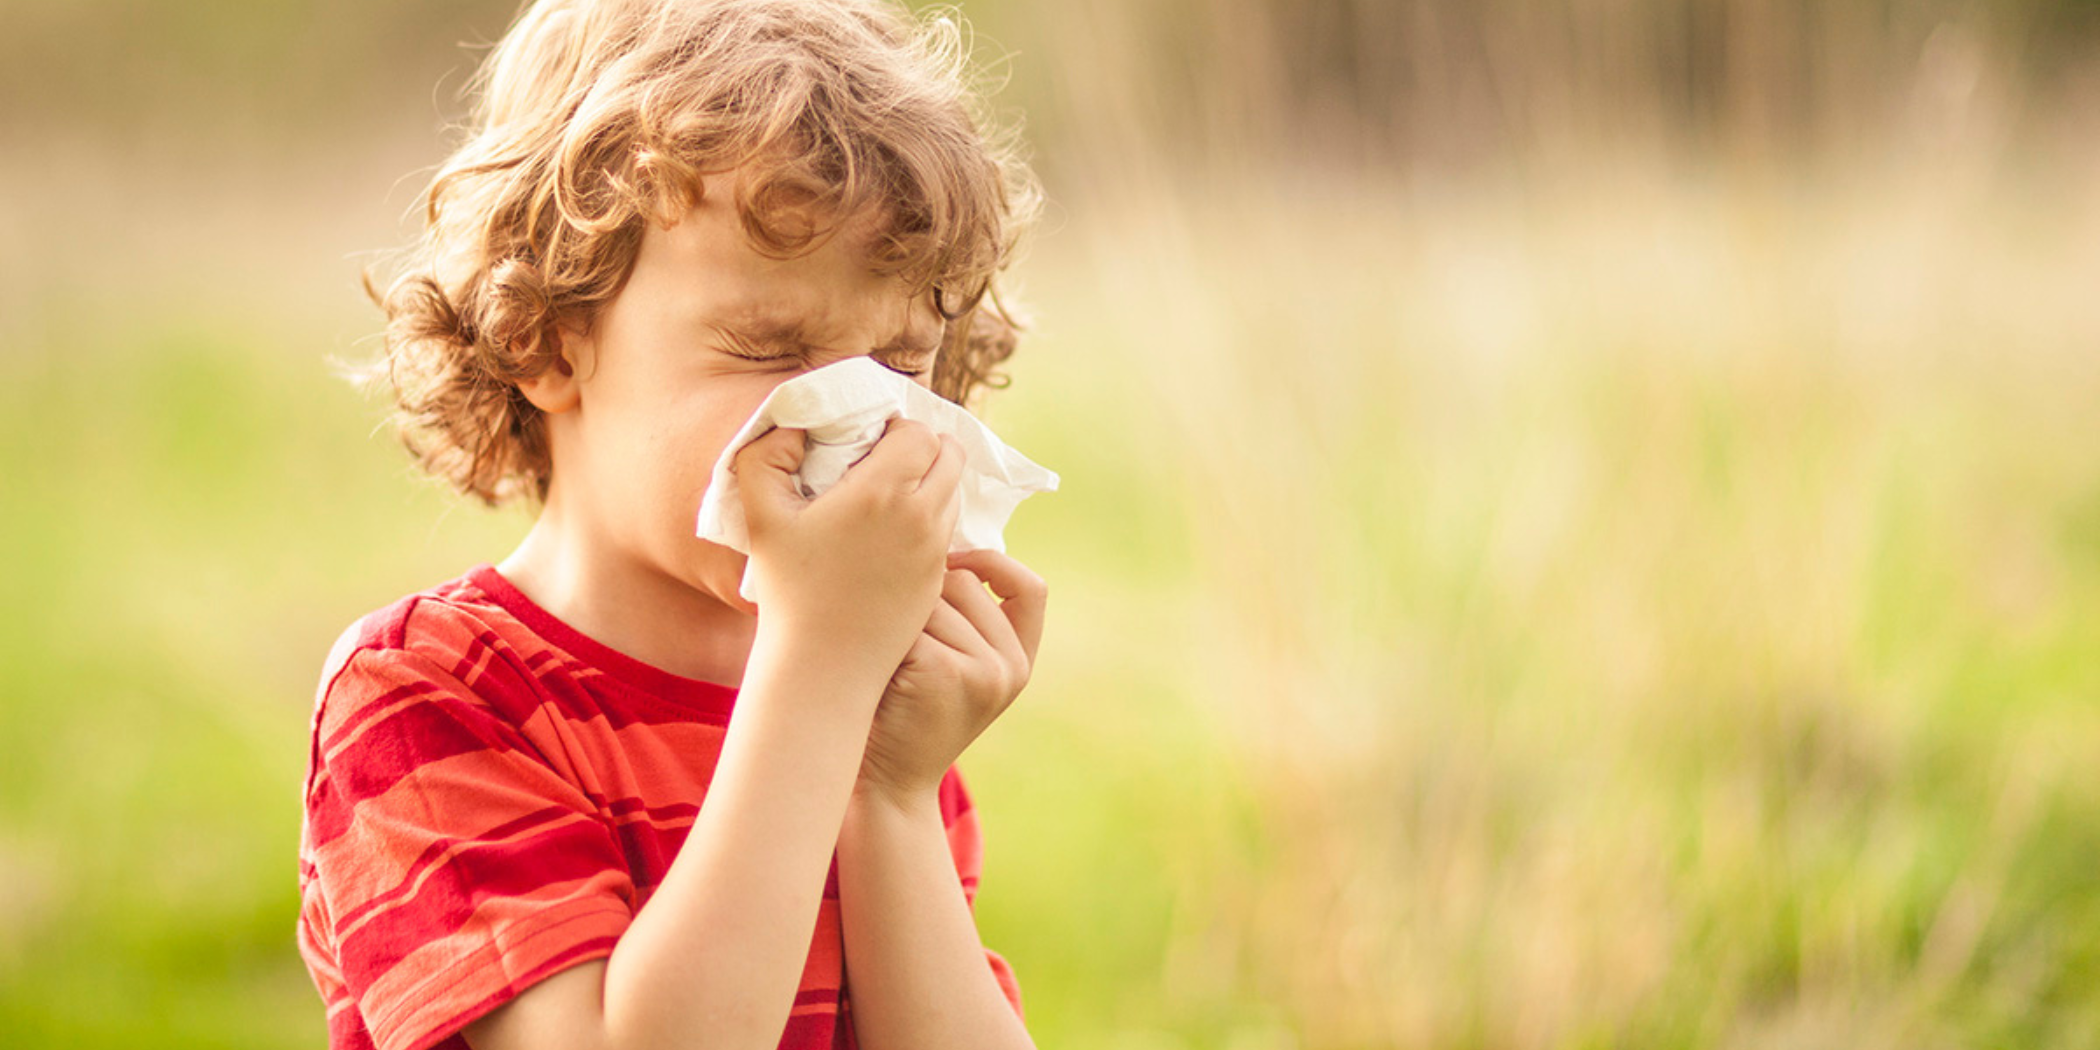 Spring allergies or common cold? How to spot the difference